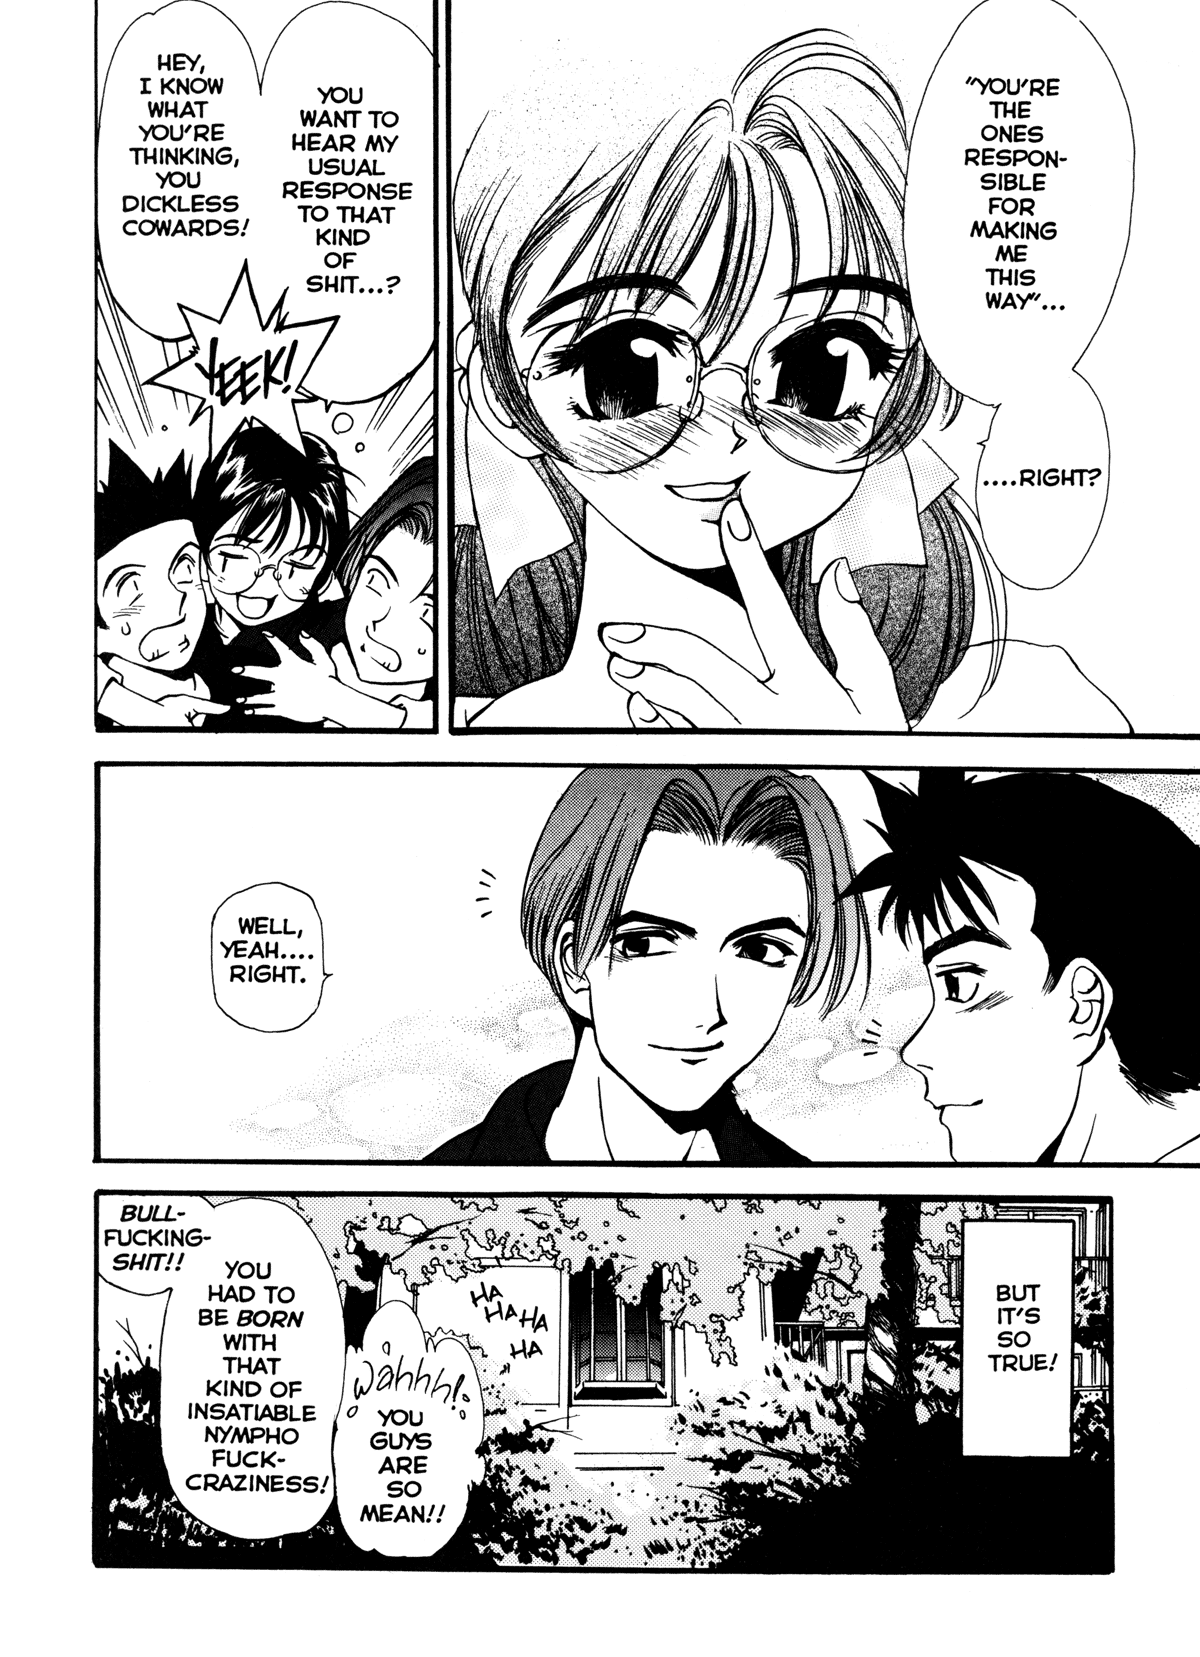 [Oh! Great] Silky Whip 5 [English] 